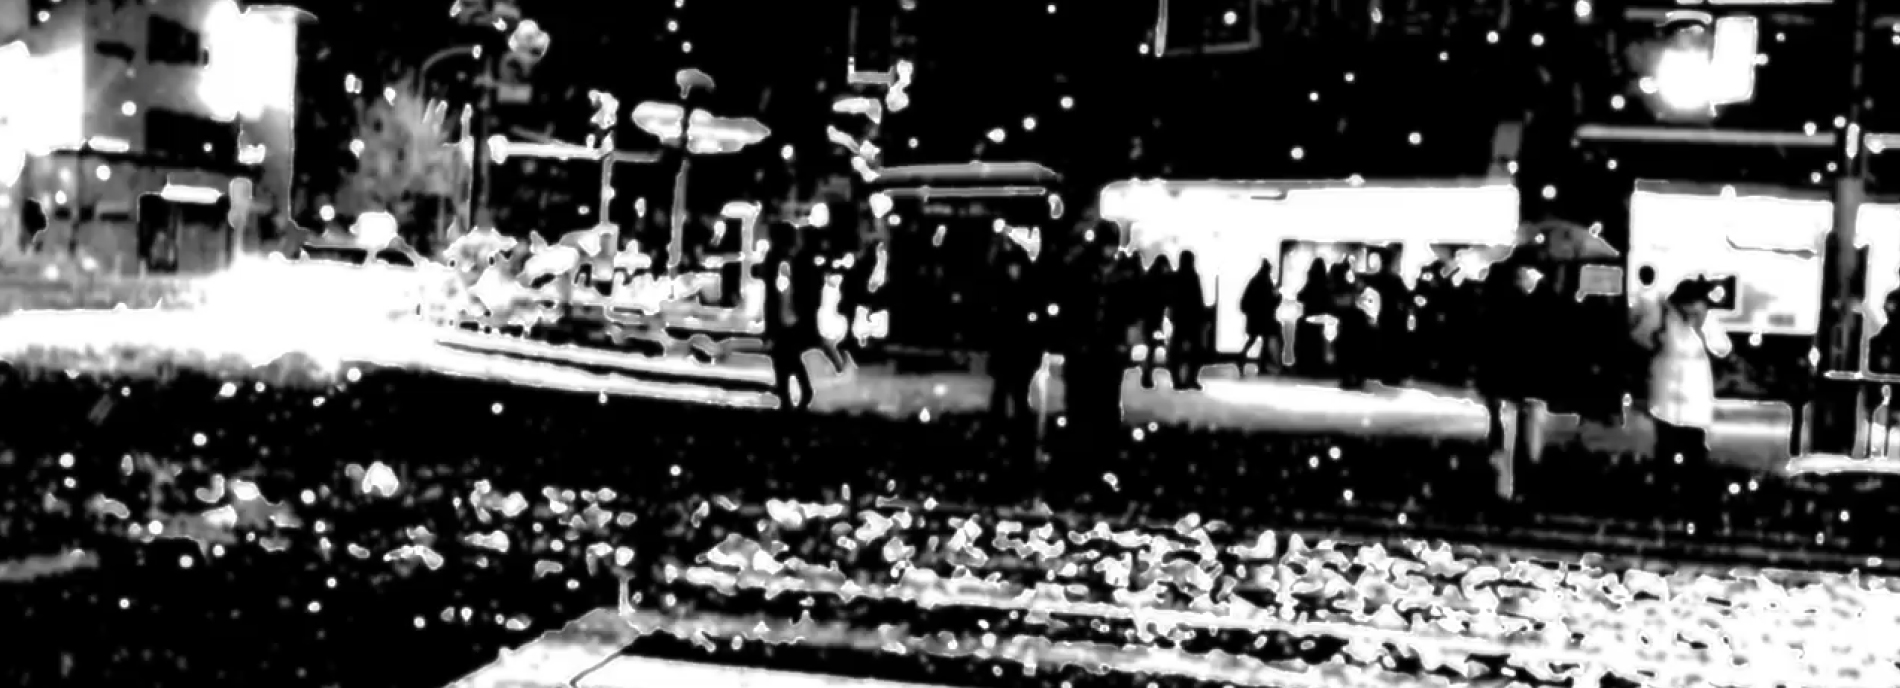 Black and white street scene with high contrast and fragmentation to show possible experience of person with autism.